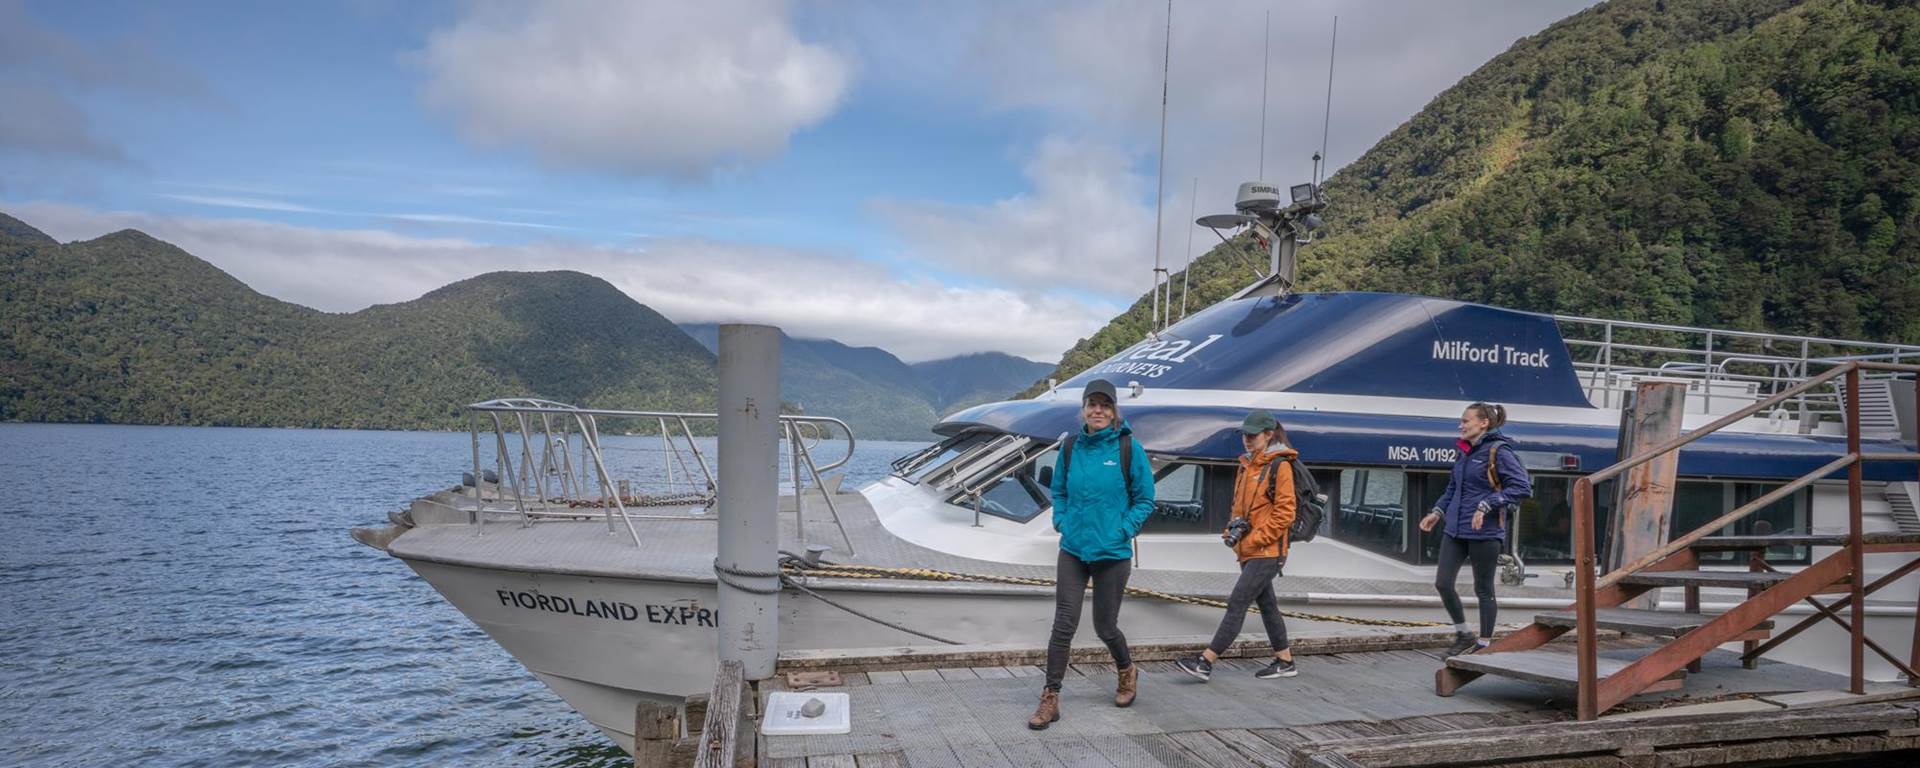 Walkers disembarking boat at Glade Wharf to start the Milford Track